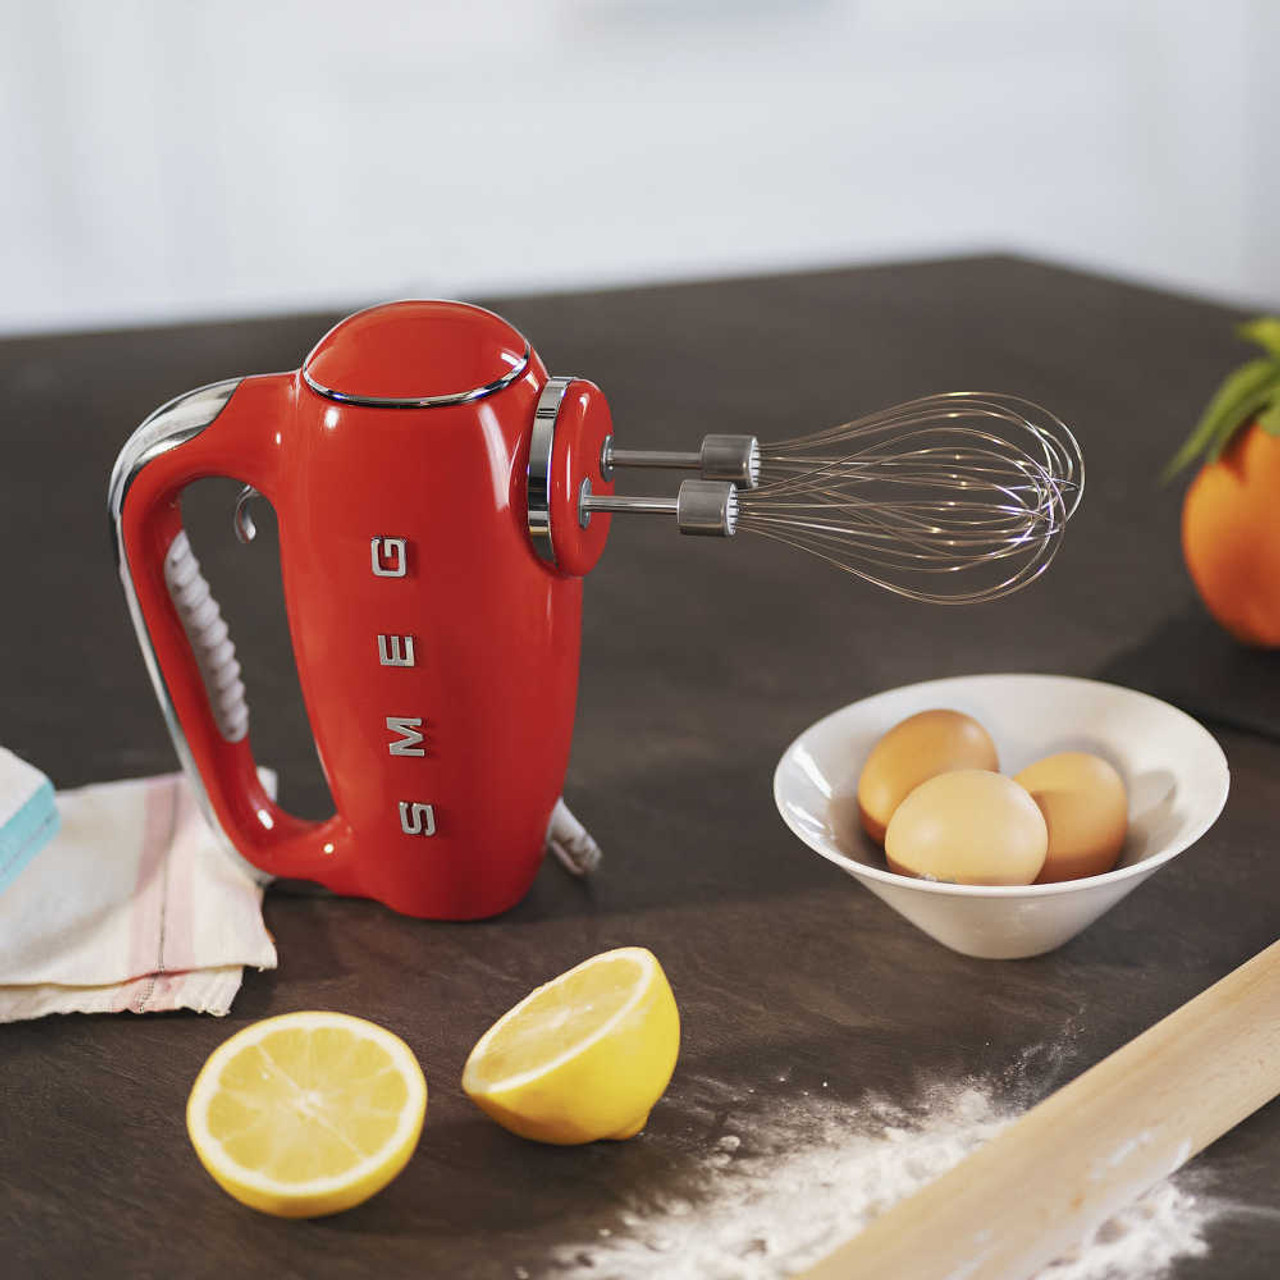 https://cdn11.bigcommerce.com/s-hccytny0od/images/stencil/1280x1280/products/4254/16122/smeg-hand-mixer-red-2__99005.1630248662.jpg?c=2?imbypass=on